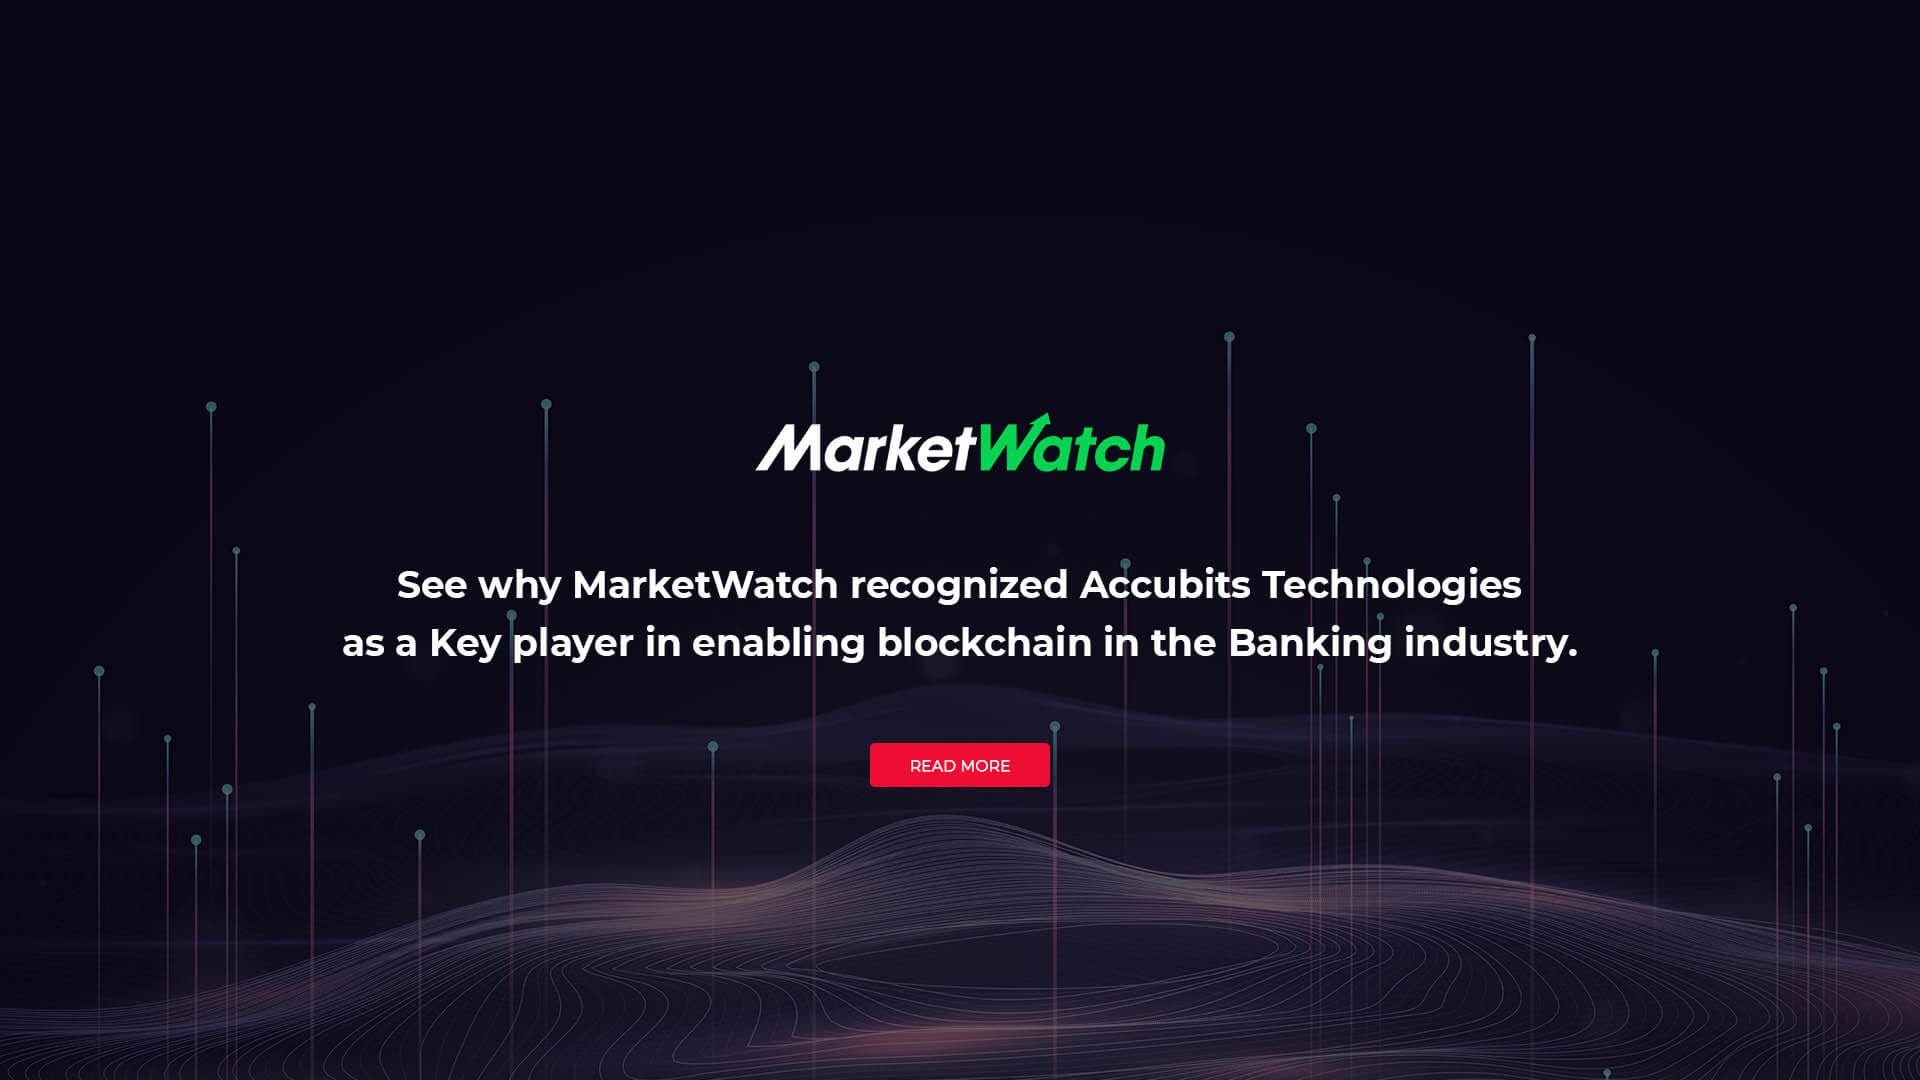 See why MarketWatch recognized Accubits Technologies as a Key player in enabling blockchain in the Banking industry.